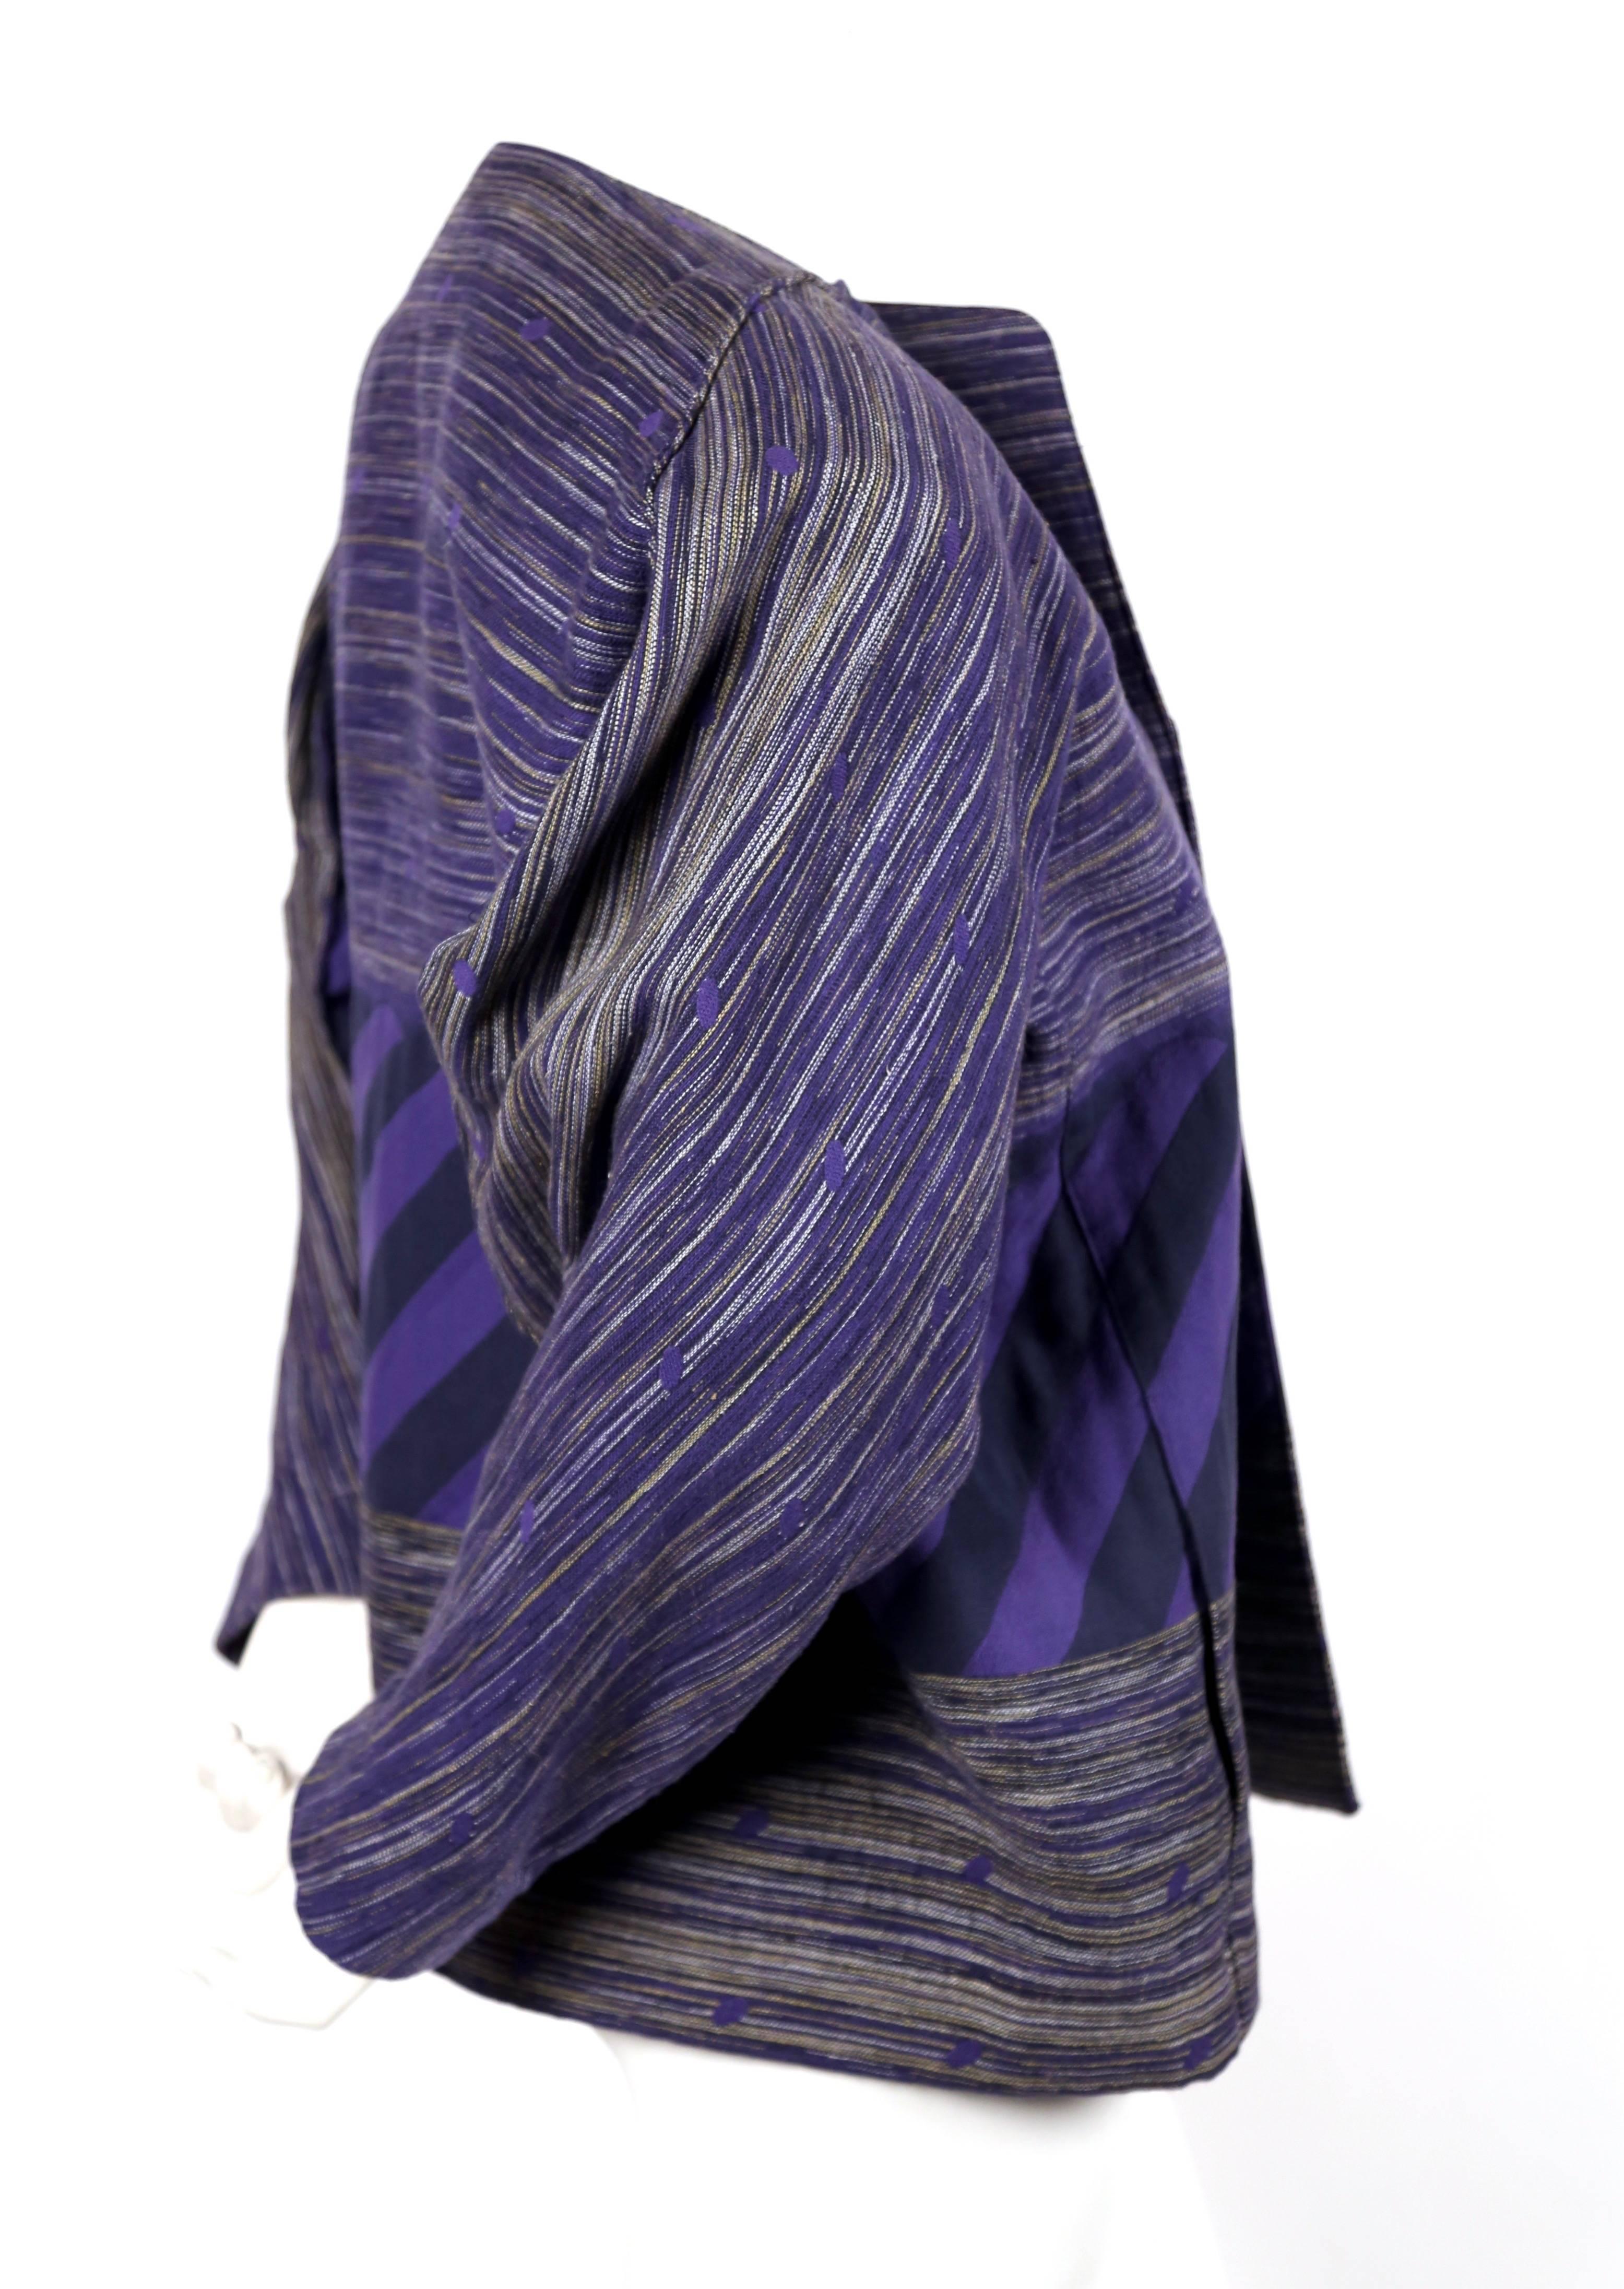 Vividly colored woven striped jacket from Issey Miyake dating to 1982 exactly as seen on the spring runway. Size 'M'. Approximate measurements: bust 50